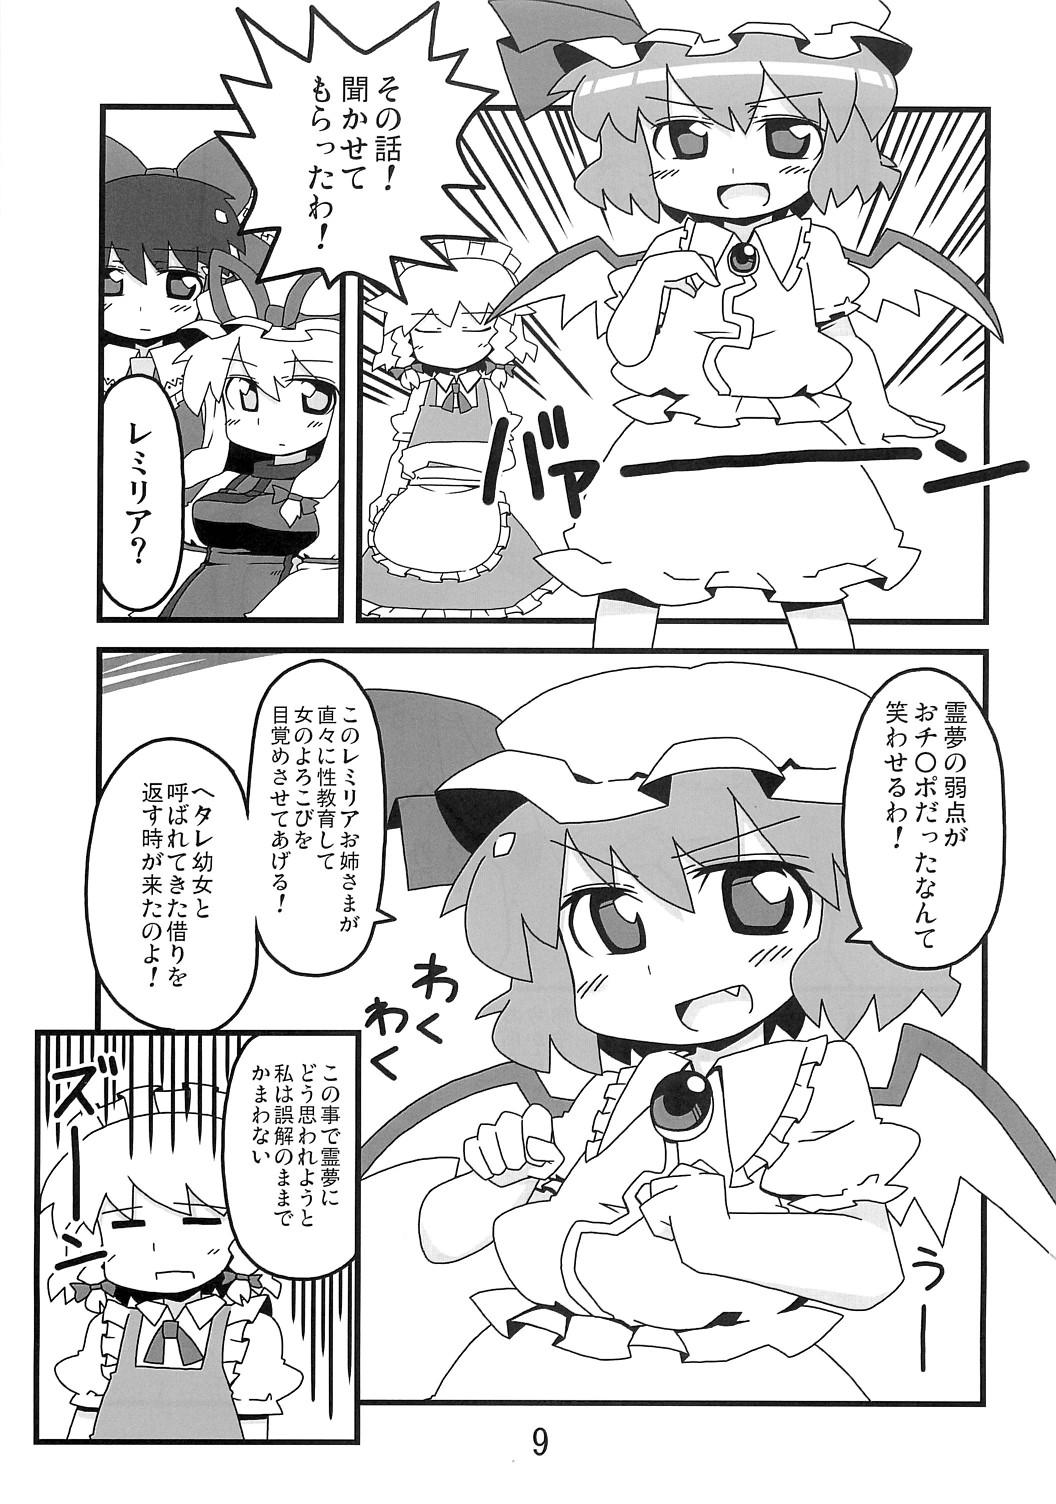 Girl 東方豊年祭 - Touhou project Blackwoman - Page 8